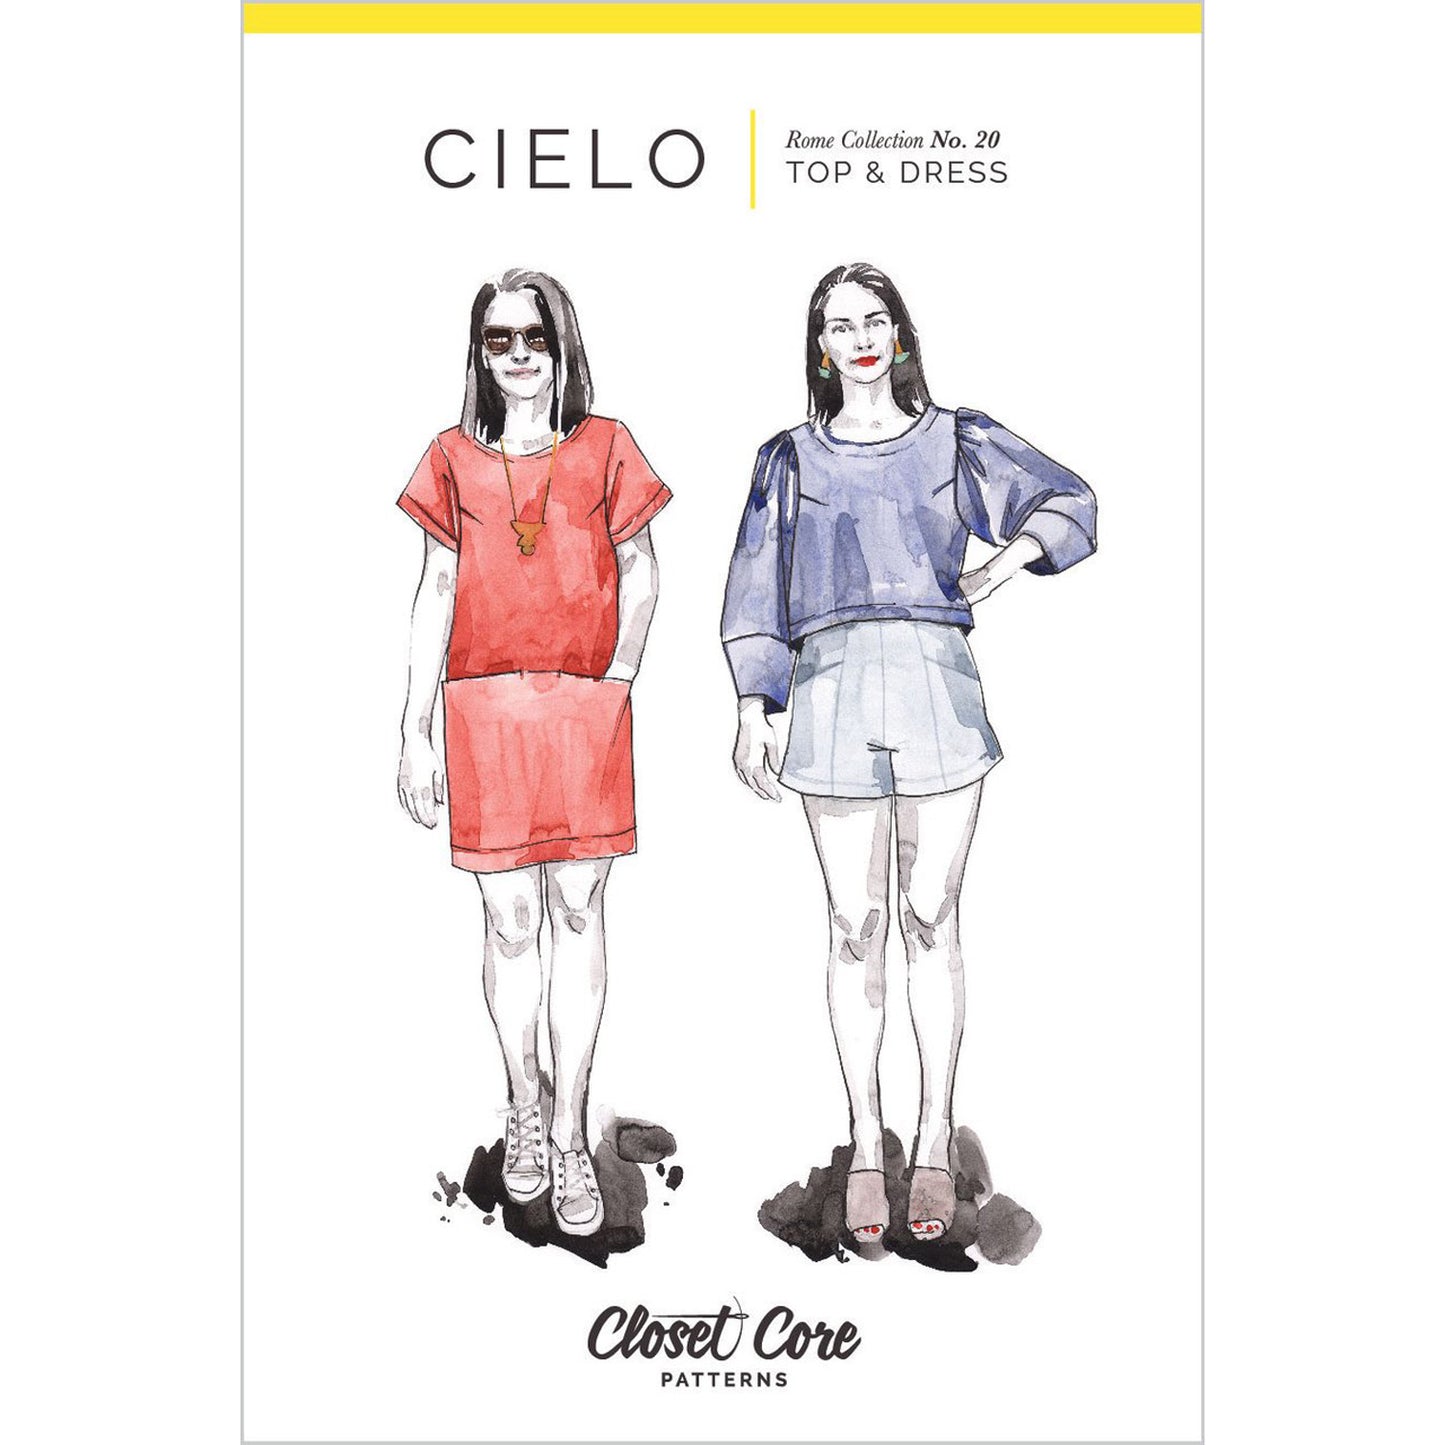 Cielo Top and Dress Sewing Pattern - Closet Core Patterns